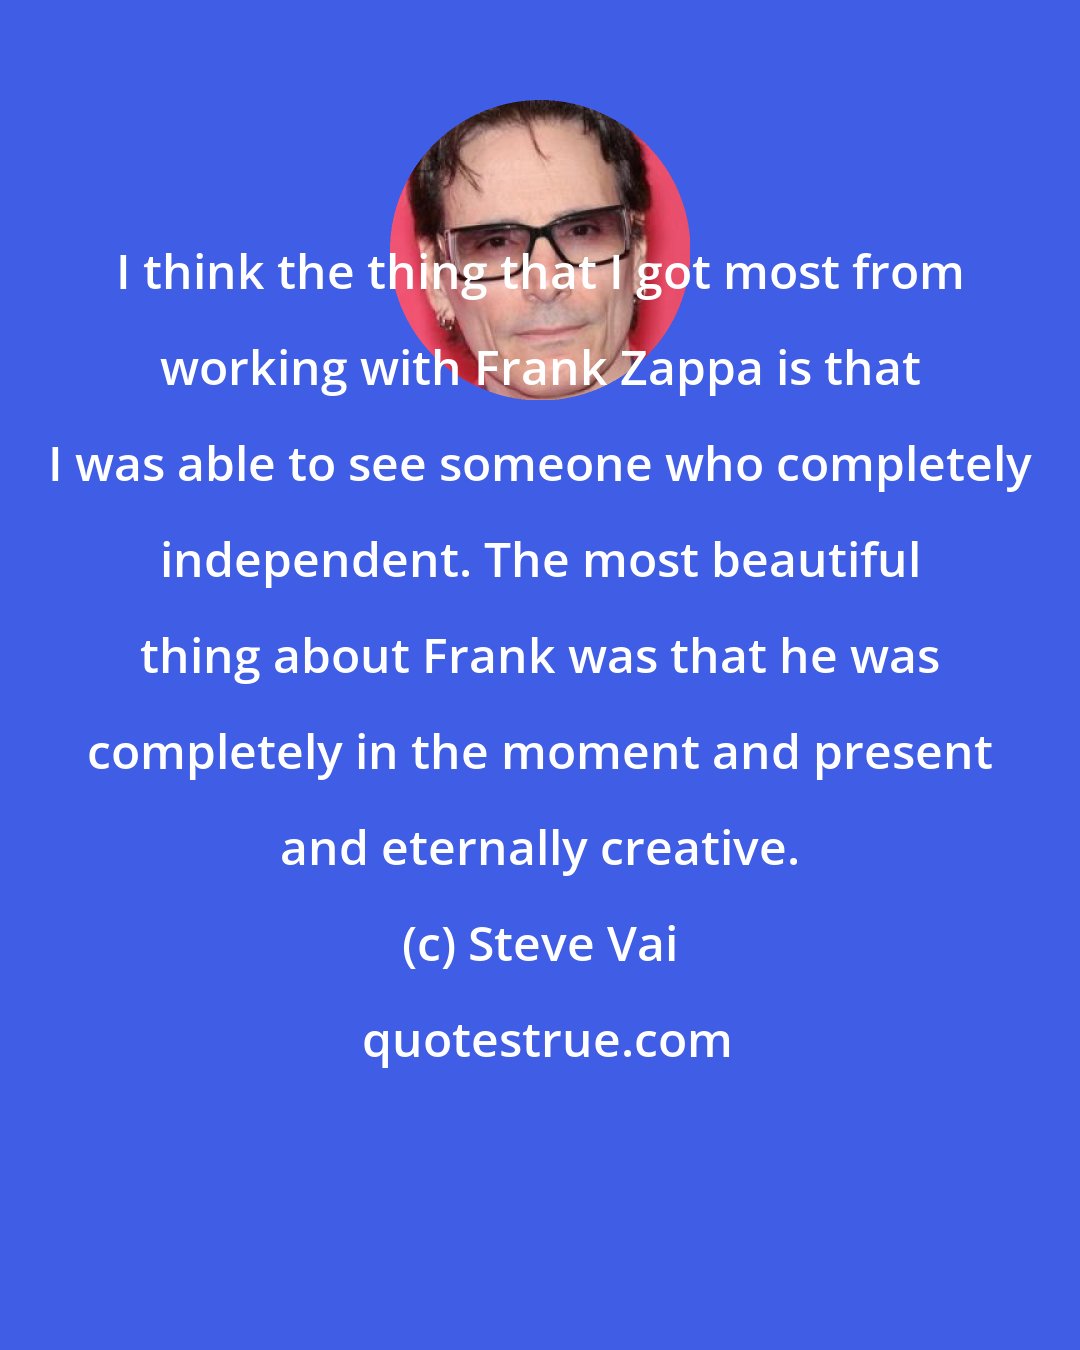 Steve Vai: I think the thing that I got most from working with Frank Zappa is that I was able to see someone who completely independent. The most beautiful thing about Frank was that he was completely in the moment and present and eternally creative.